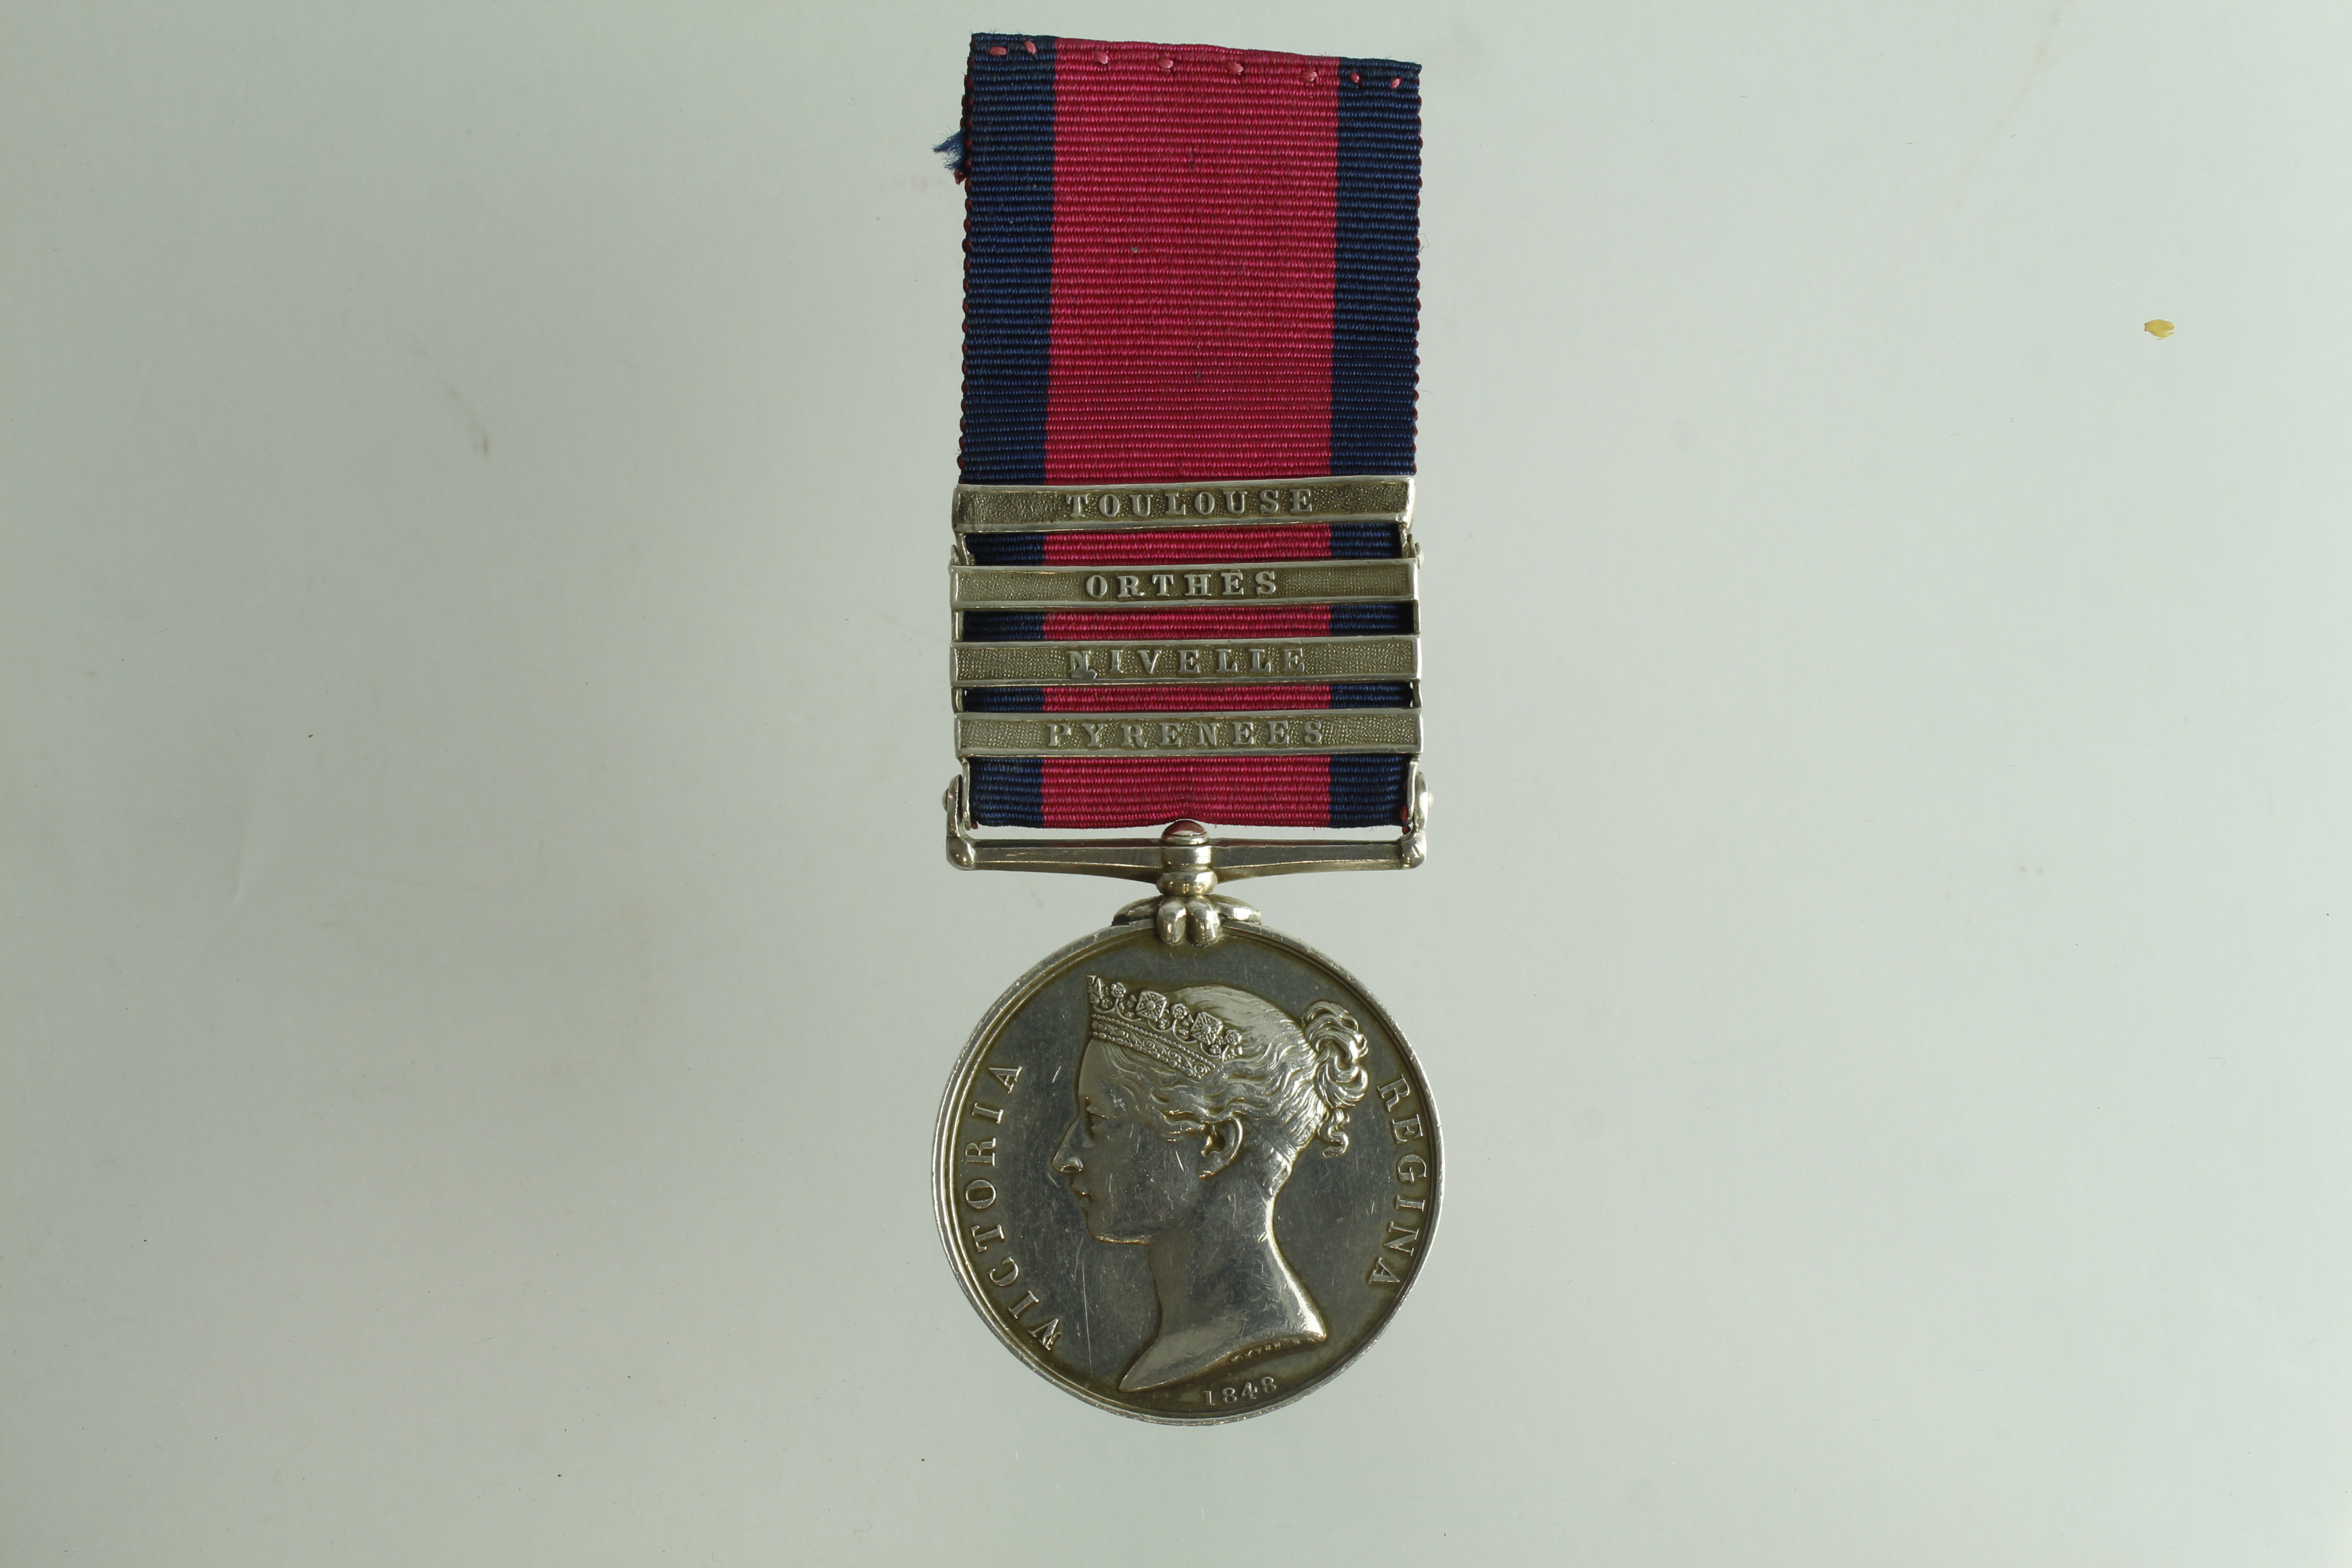 Militray General Service Medal 1848 with bars Pyrenees / Nivelle / Orthes / Toulouse correctly named